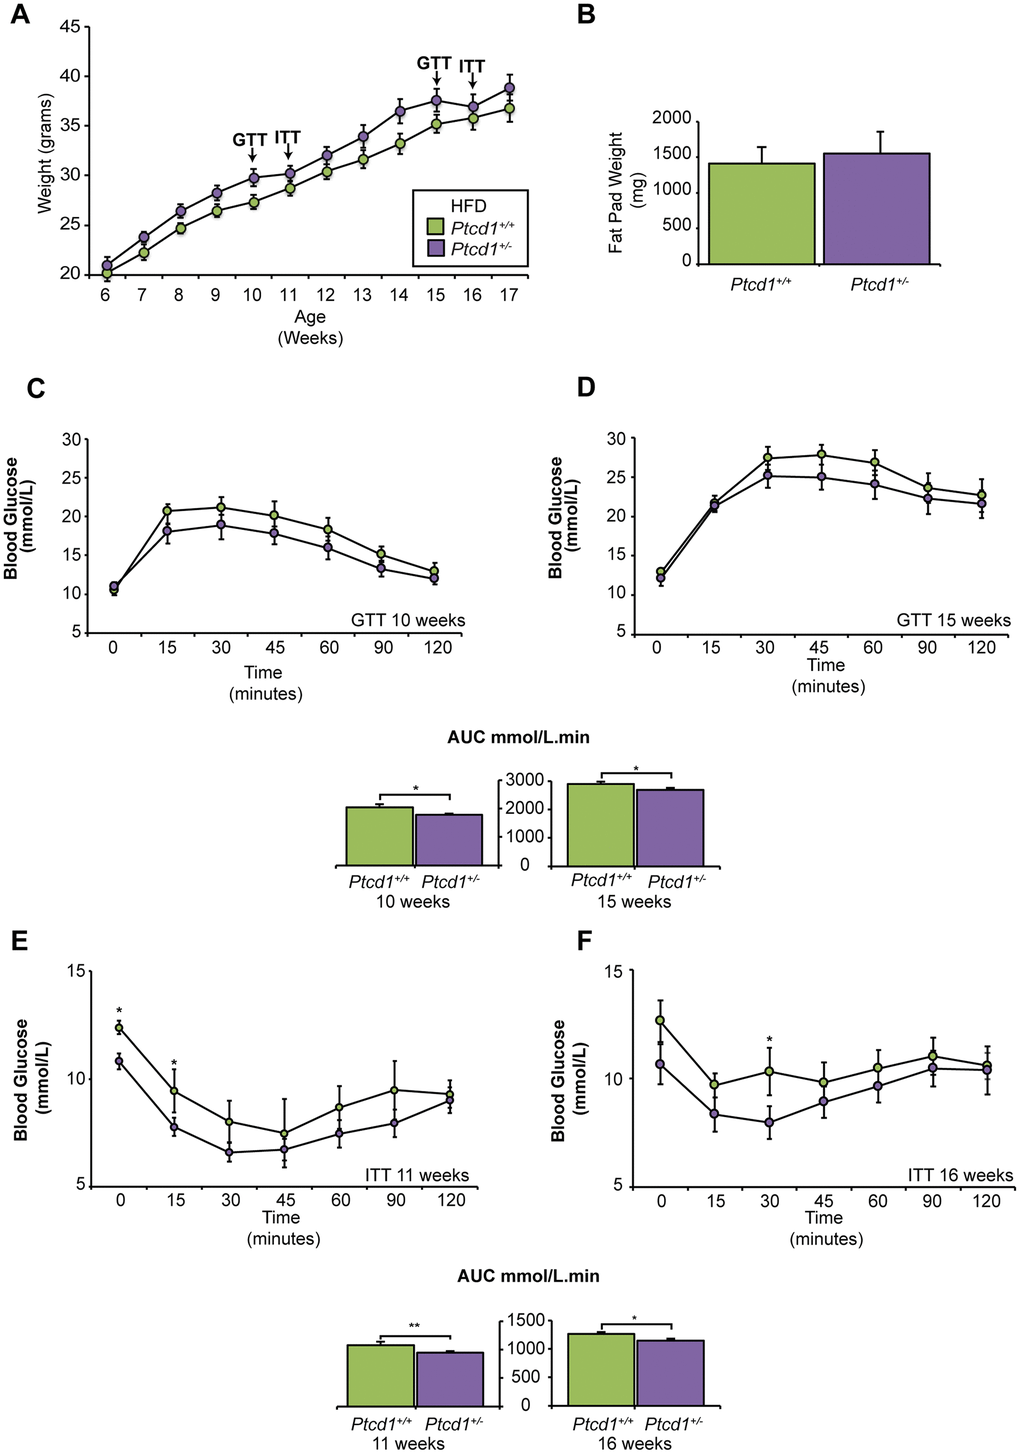 The effects of high fat diet on mice with reduced mitochondrial protein synthesis. (A) Weight gain in grams from 12 weeks of HFD feeding between Ptcd1+/+ (n=10) and Ptcd1+/- (n=10) mice (B) Weight of intra-abdominal epididymal fat pads in grams for 17-week-old Ptcd1+/+ (n=5) and Ptcd1+/- (n=5) mice fed a HFD. (C, D) Glucose tolerance in 10- and 15-week-old Ptcd1+/+ (n=10) and Ptcd1+/- (n=10) mice. Quantitative values are area under the curve (AUC) ± SEM. *P E, F) Insulin sensitivity in 11- and 16-week-old Ptcd1+/+ (n=10) and Ptcd1+/- (n=10) mice. Quantitative values are area under the curve (AUC) ± SEM. *P 